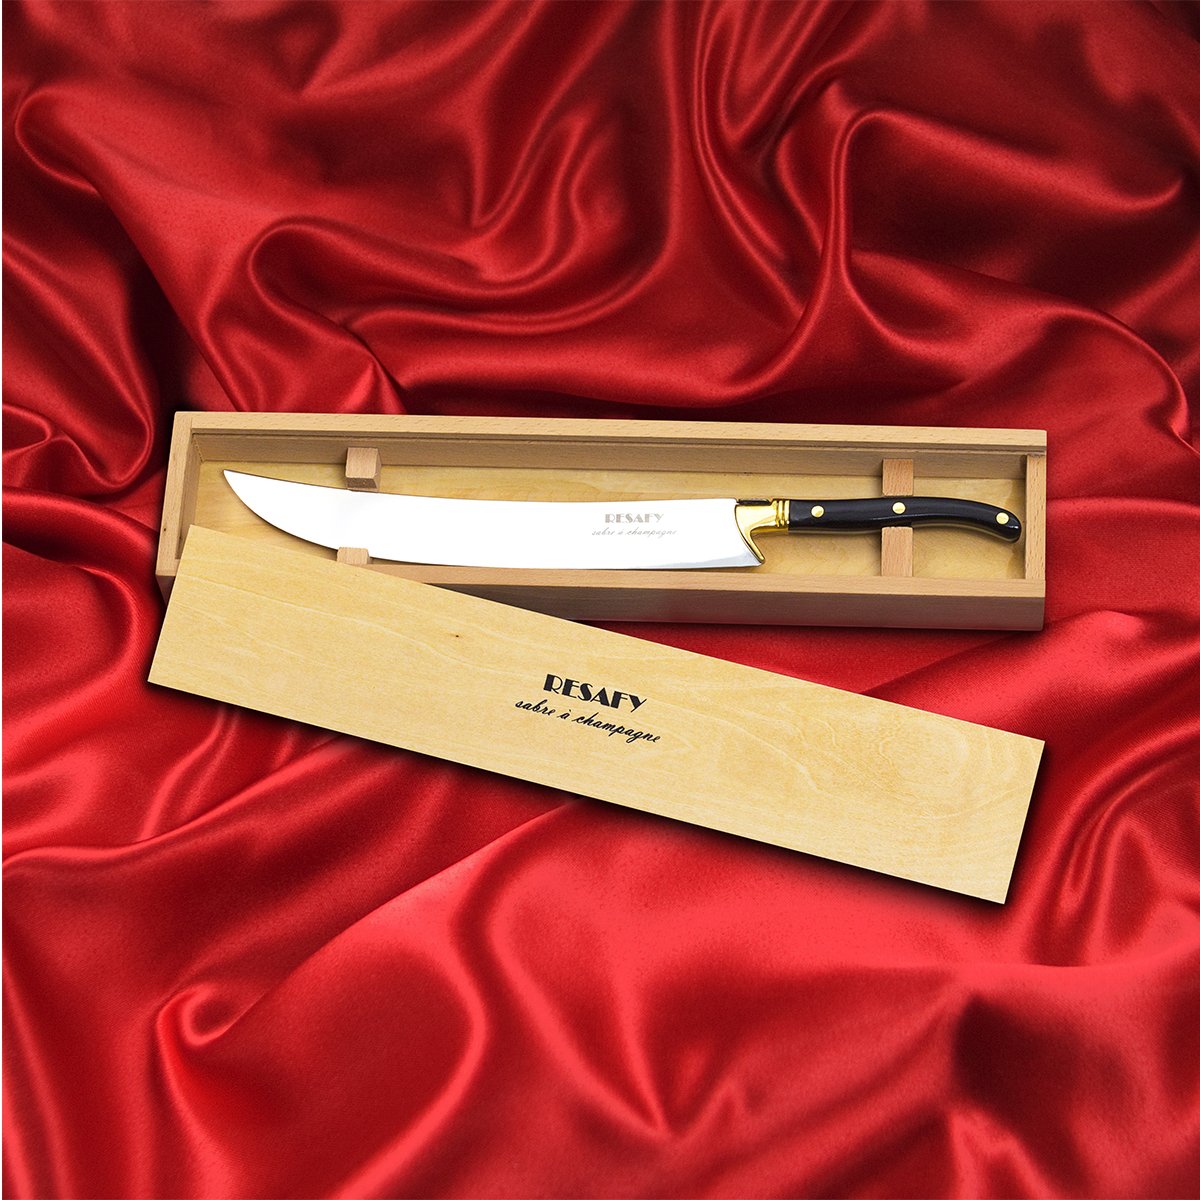 Resafy Champagne Saber With Wooden Box Champagne Knife Champagne Sword Champagne Opener